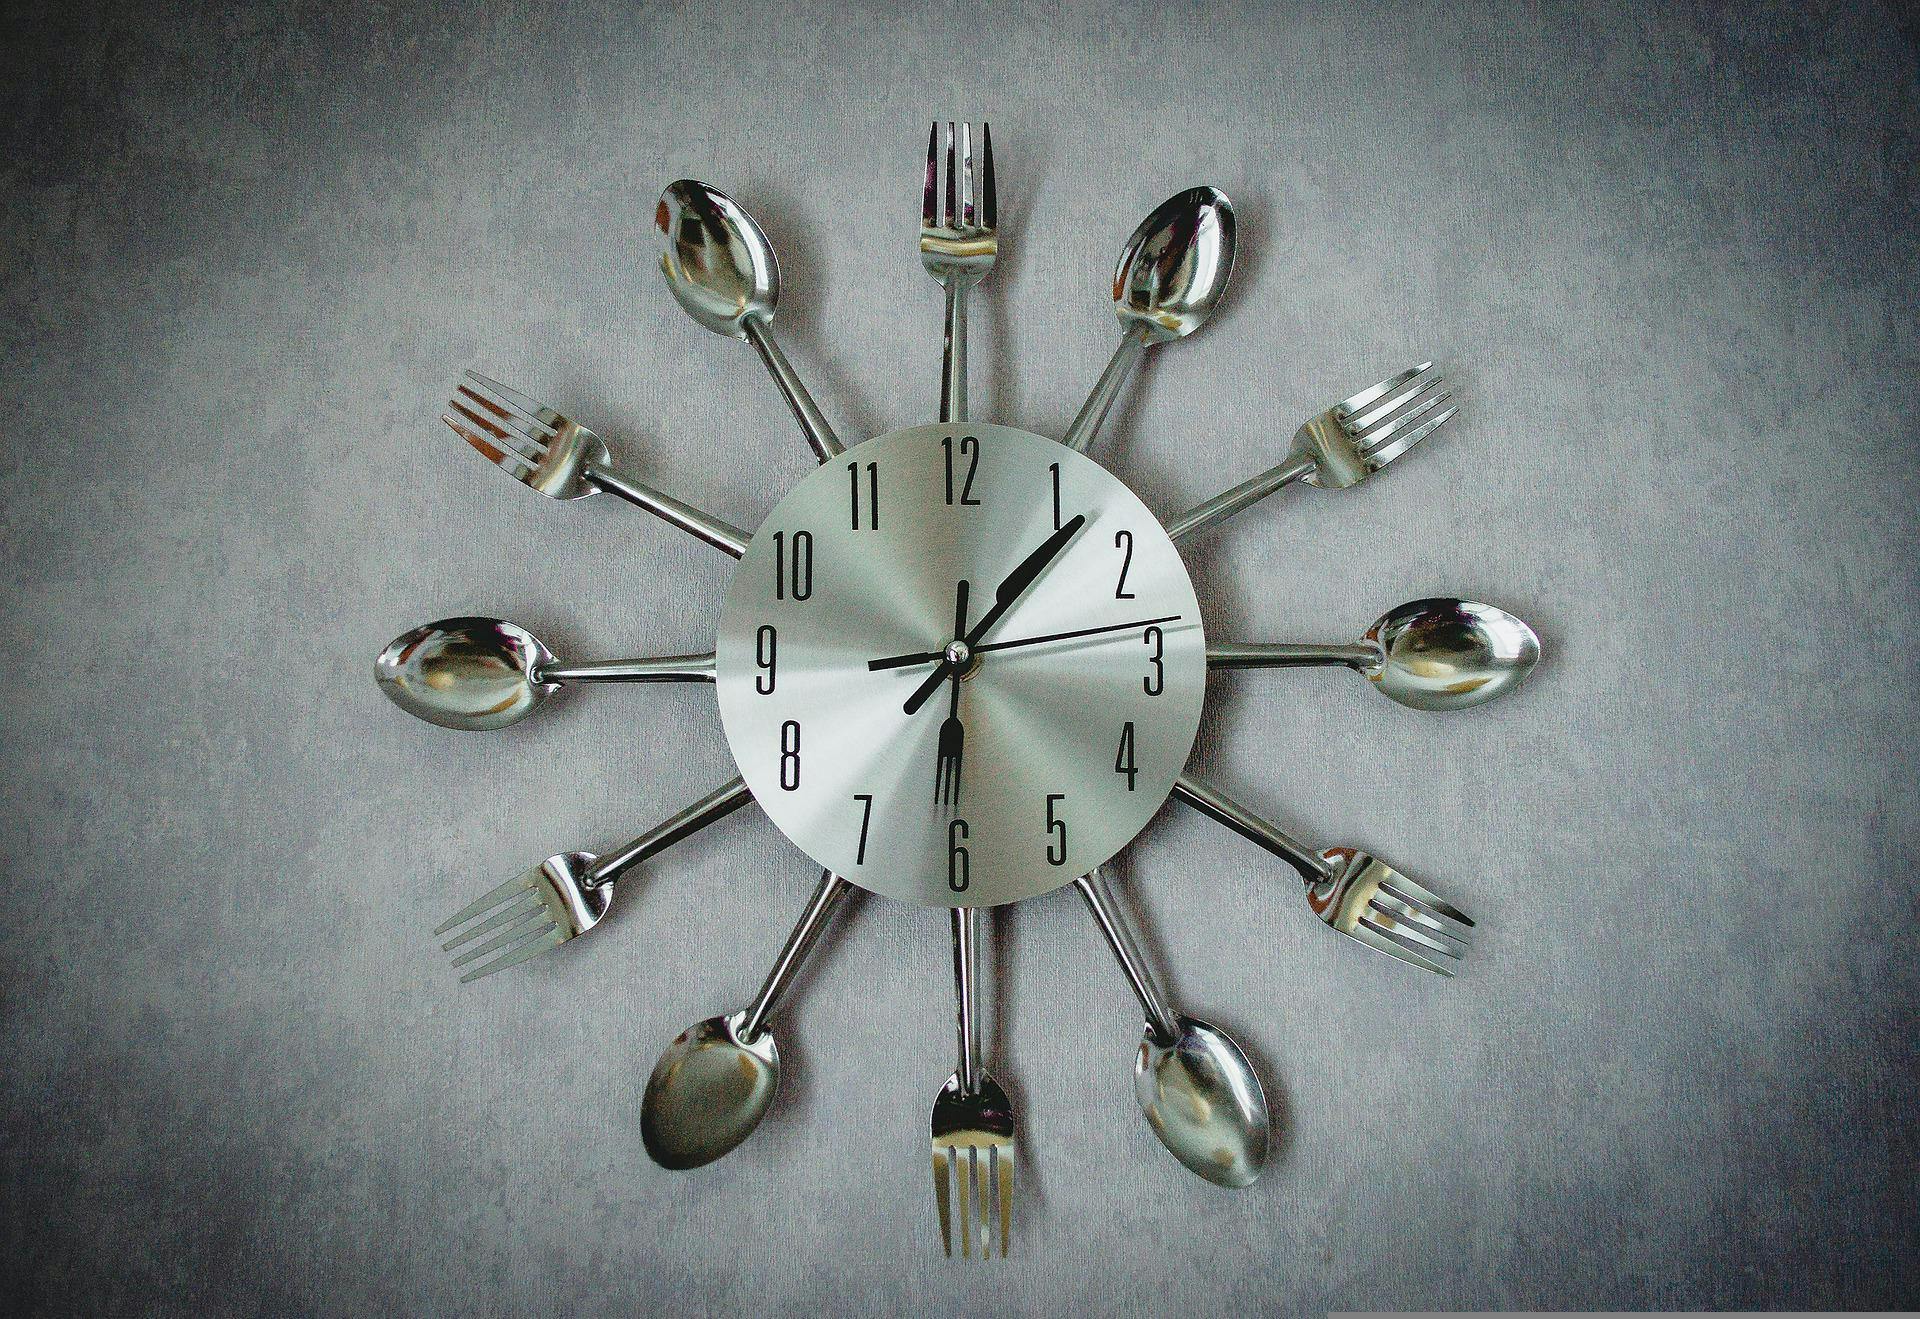 Clock surrounded by utensils.